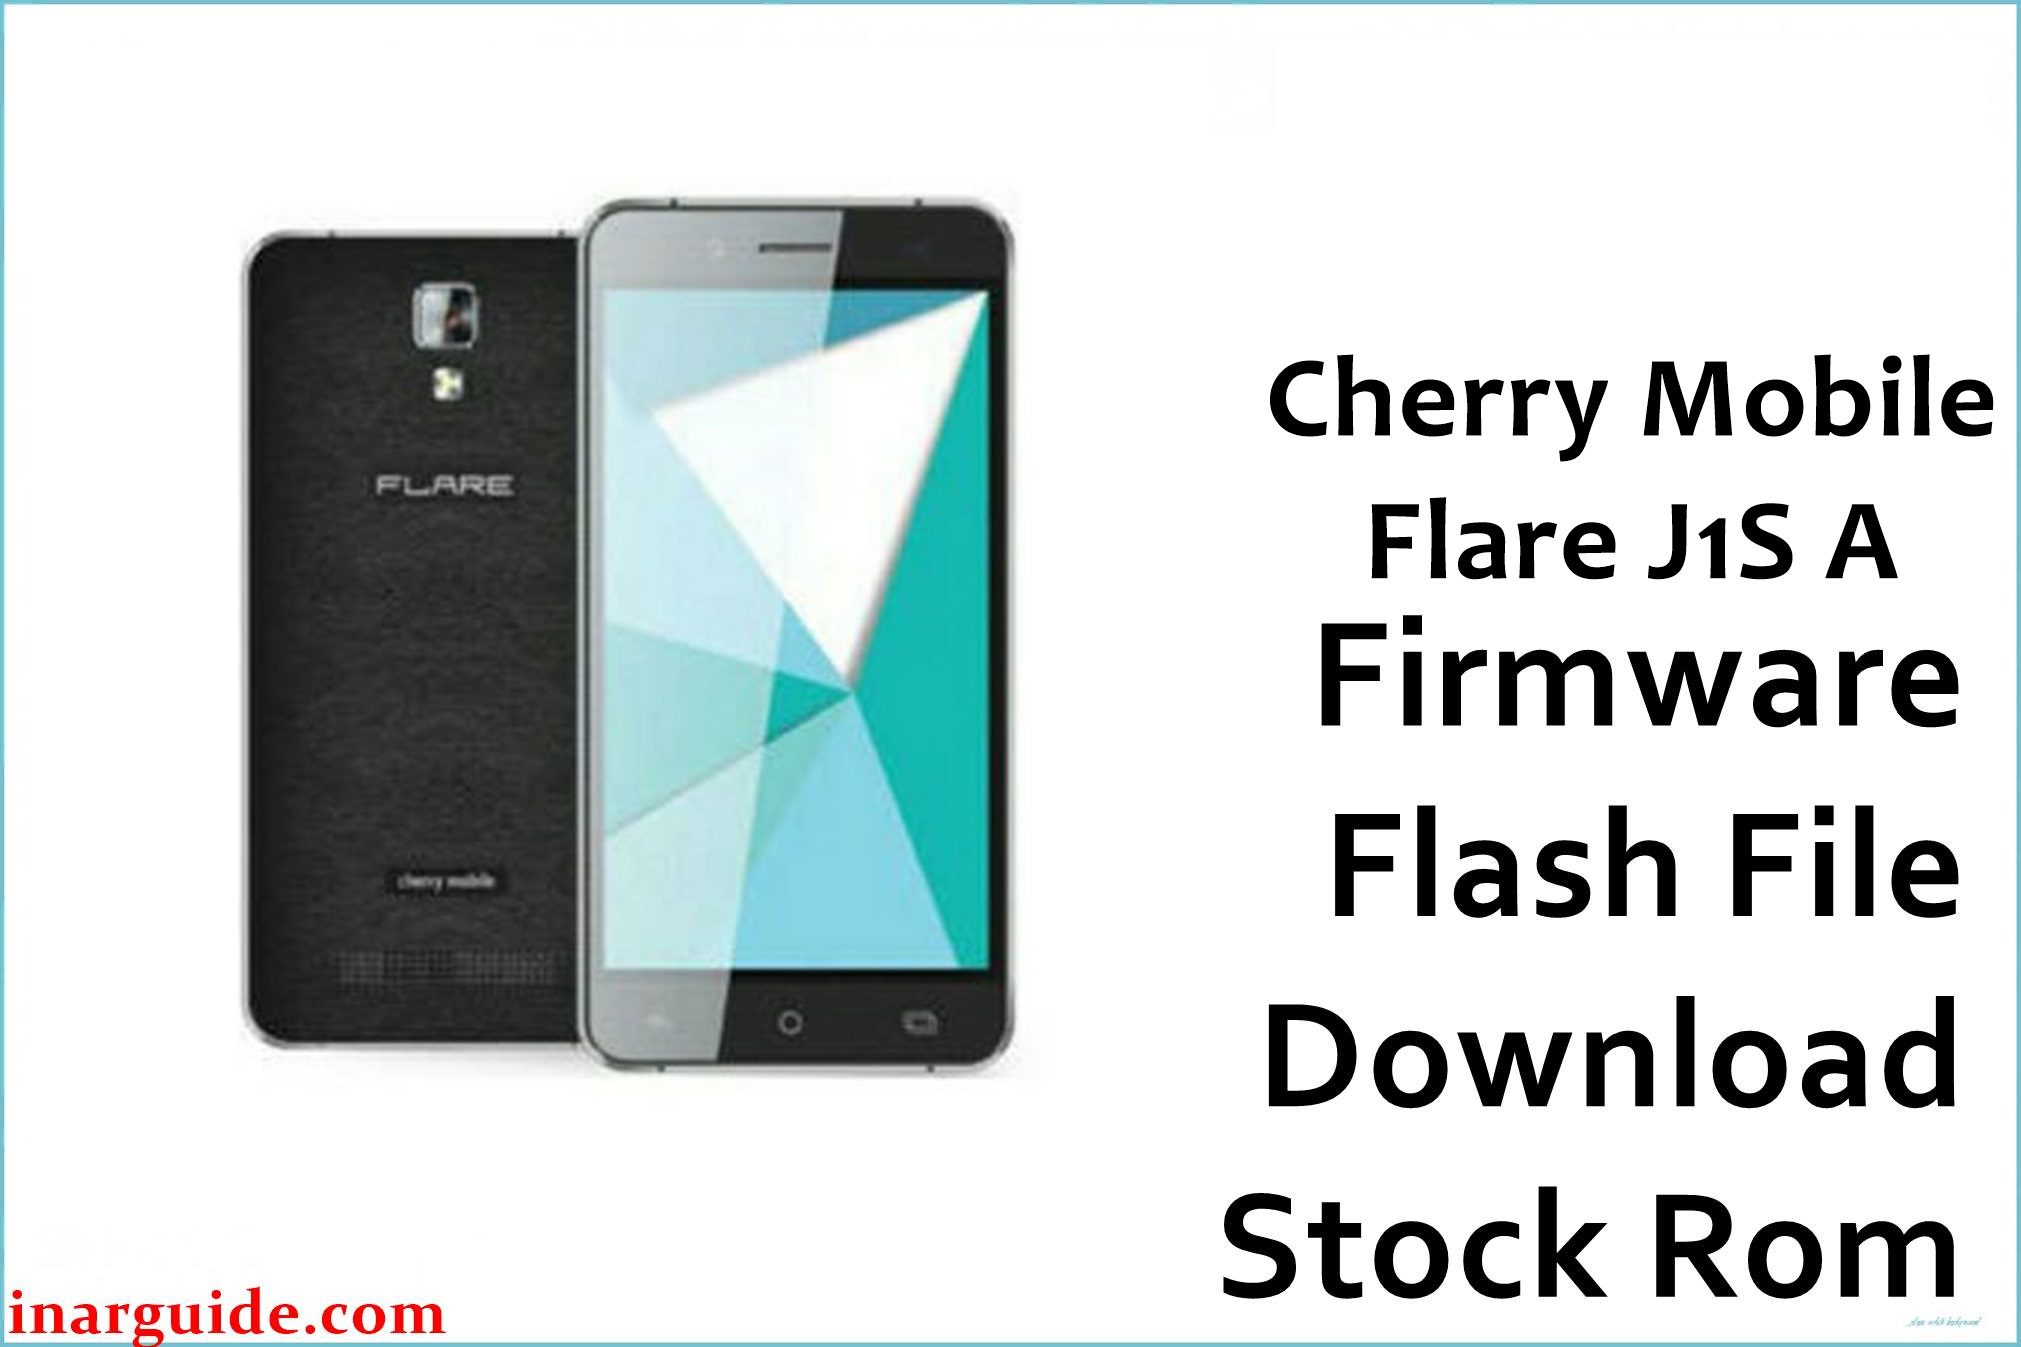 Cherry Mobile Flare J1S A